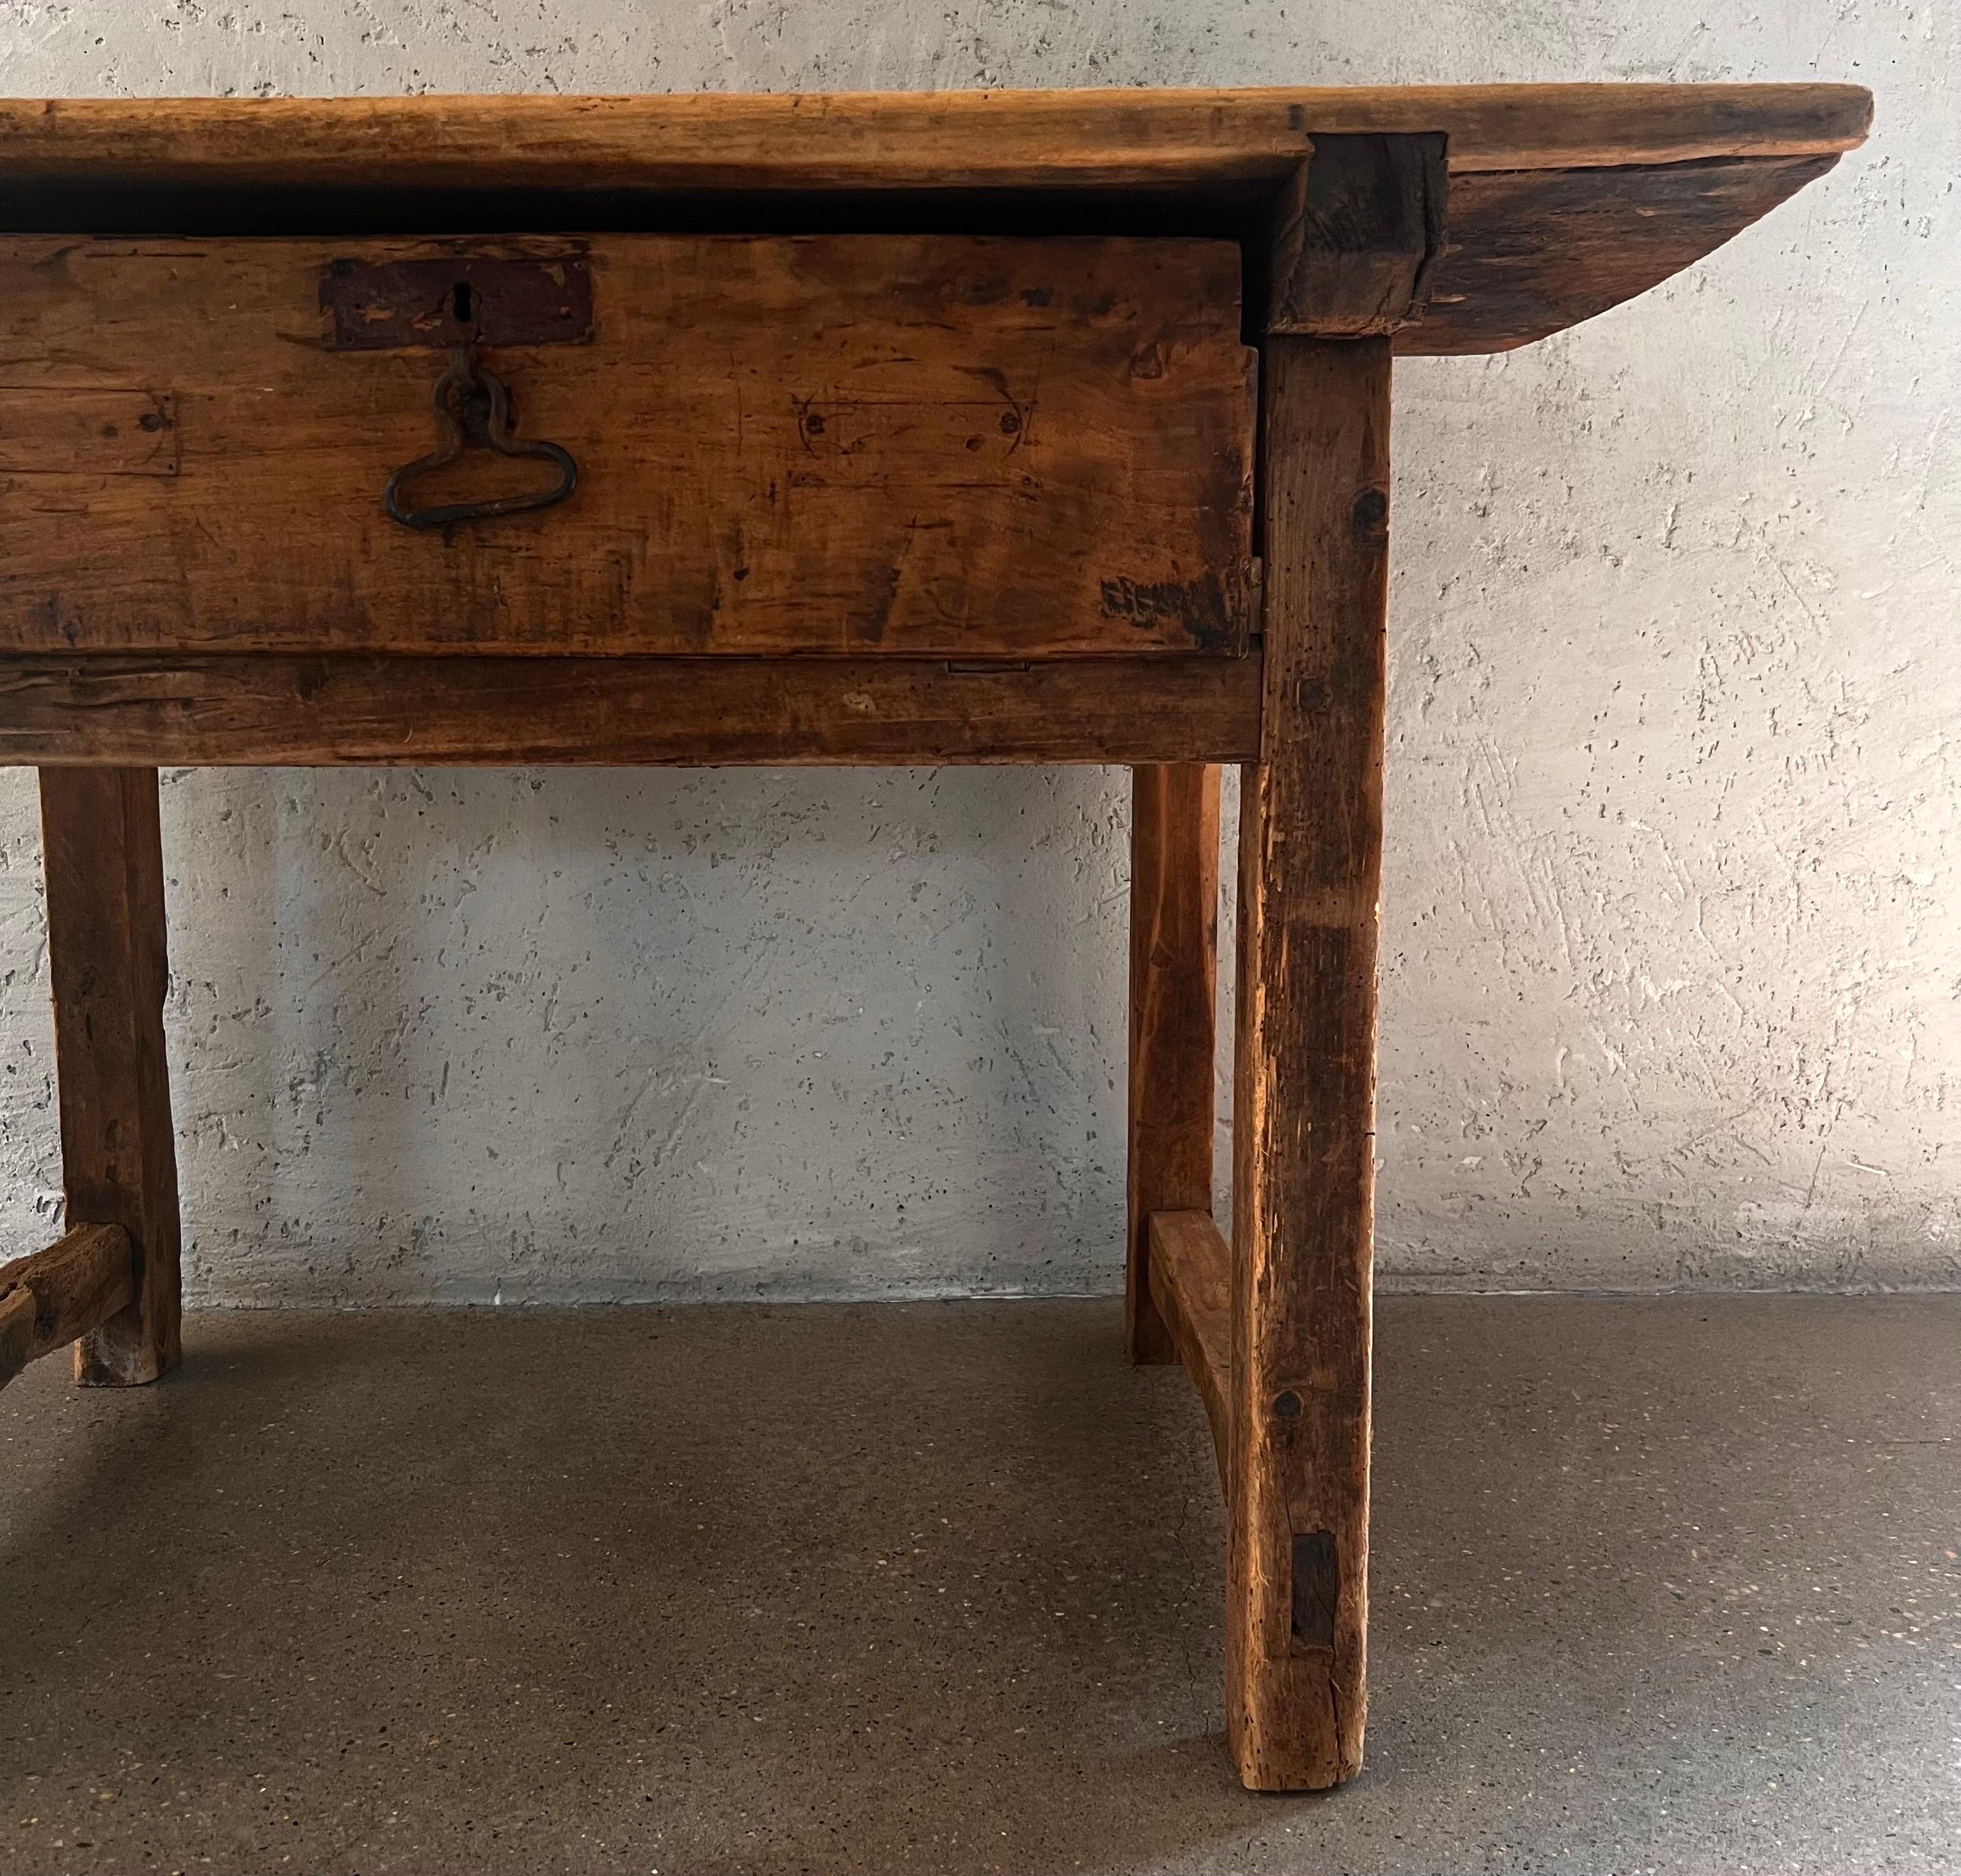 This is an authentic 17th-century Spanish table. Gorgeous patina, is structurally sound, and full of life.  Every inch is as it has been for centuries. 